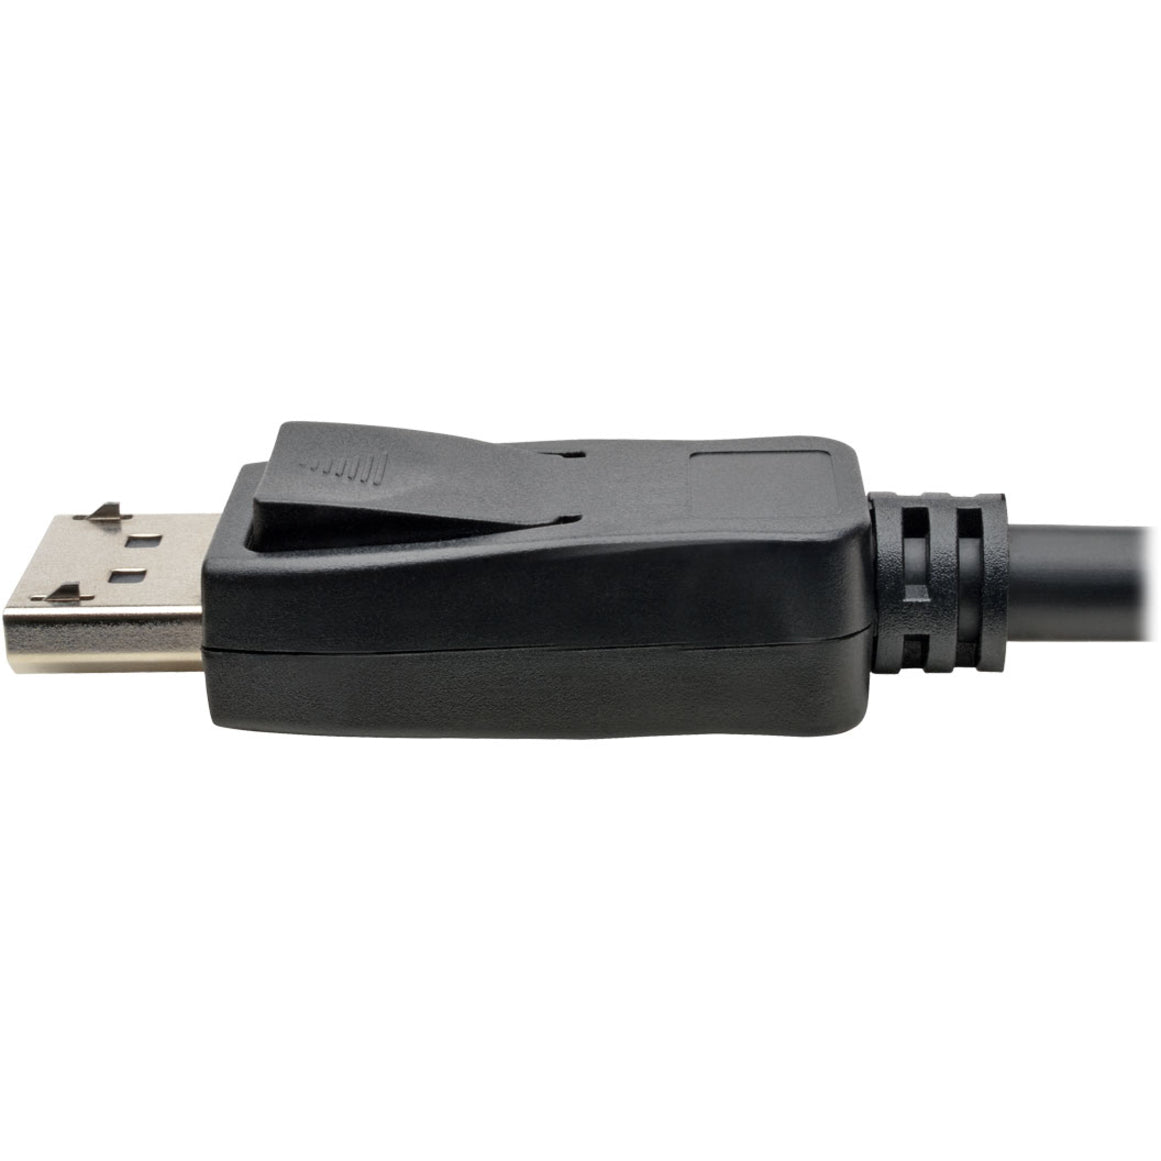 Tripp Lite P582-020-HD-V2A DisplayPort 1.2a to HDMI Active Adapter Cable (M/M), 20 ft.